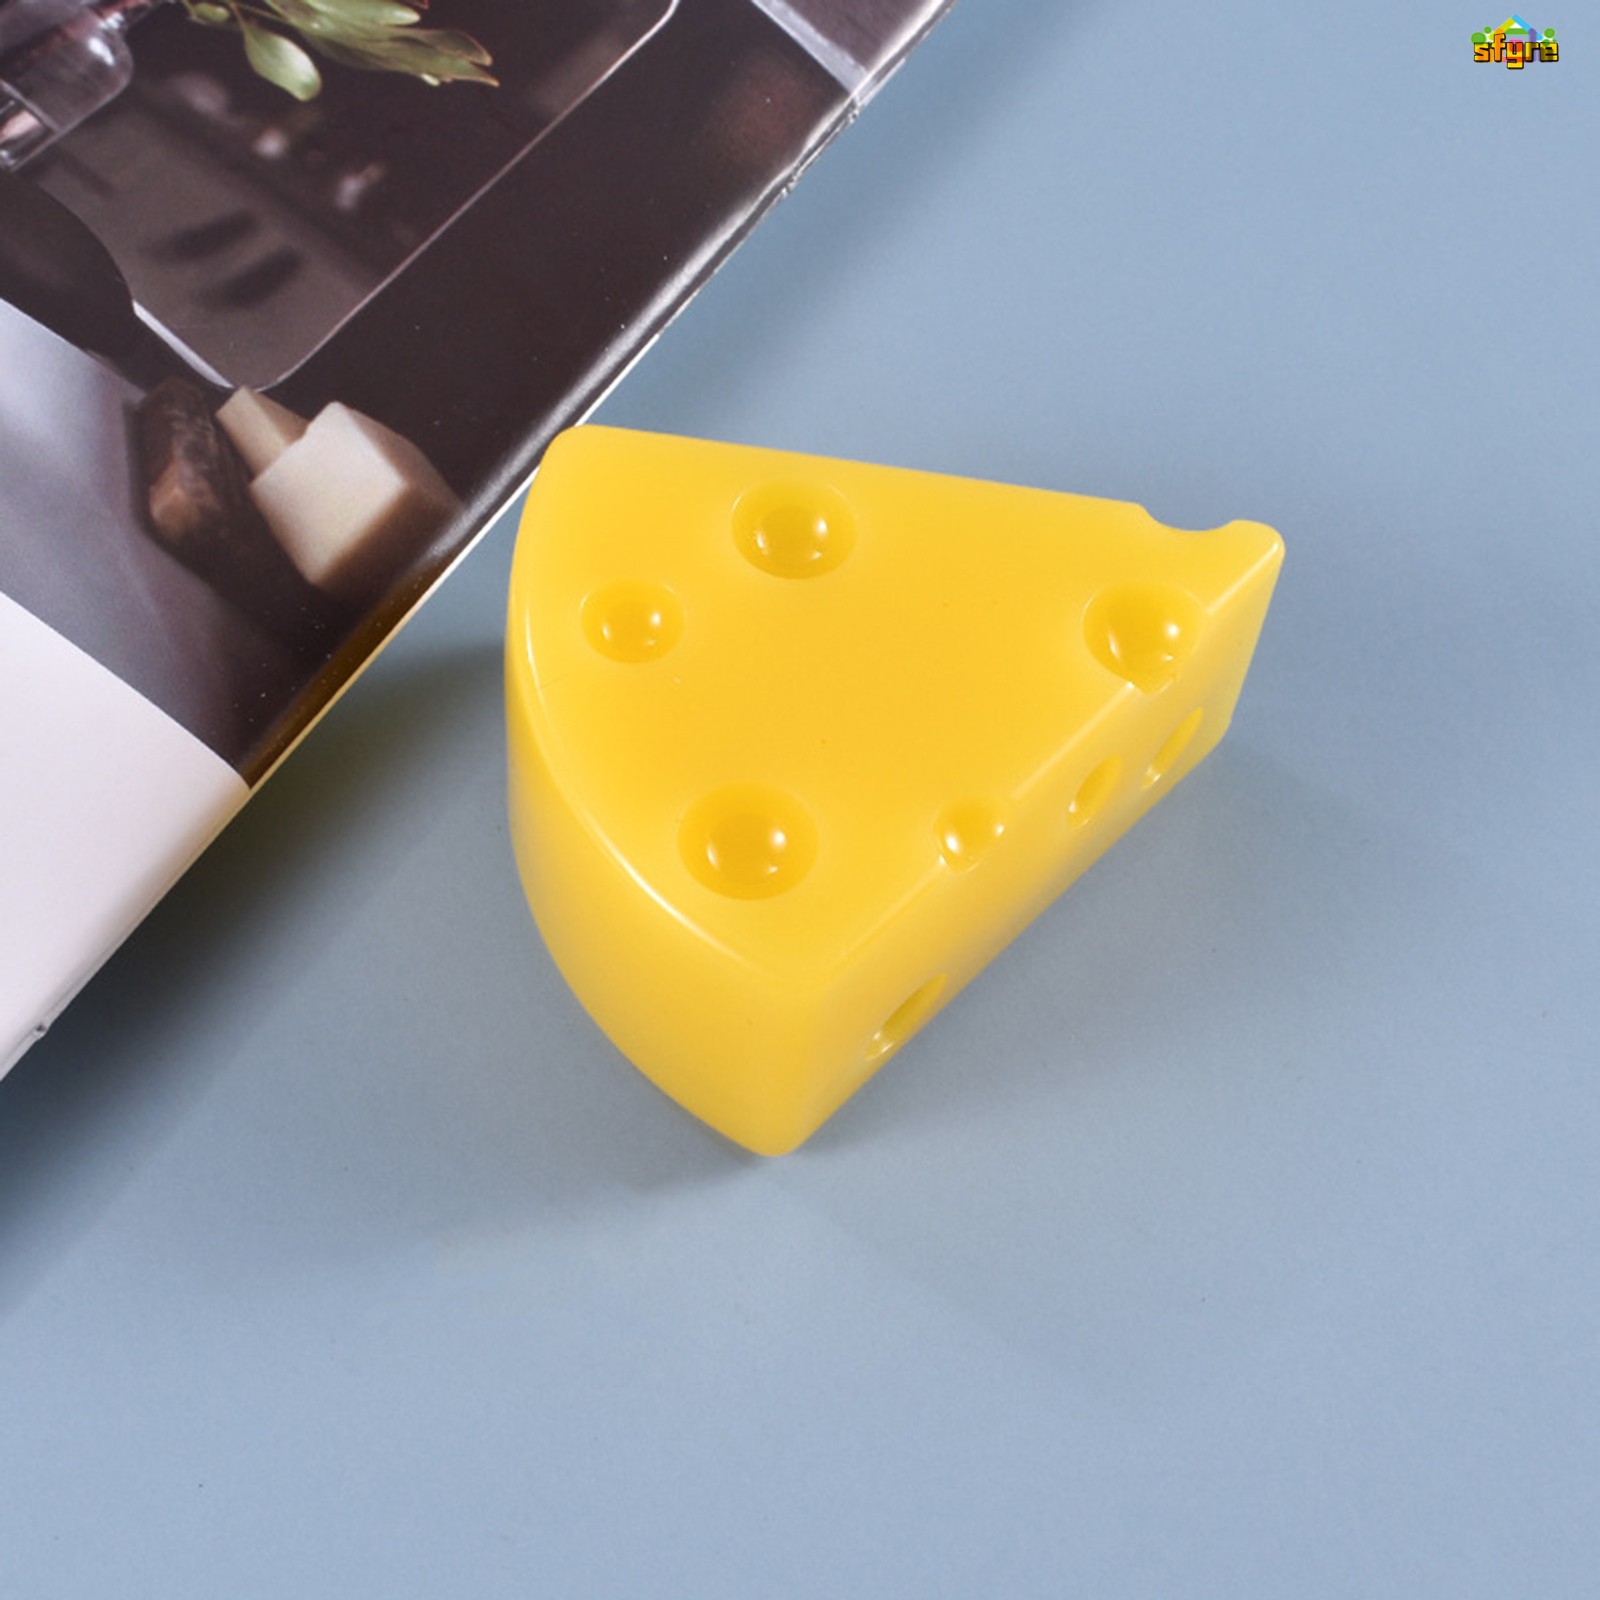 【COD】 Cheese Shape Silicone Mold 8 Grids Mousse Mold for Kitchen Baking 3D Cake Candy Cheese or Dessert